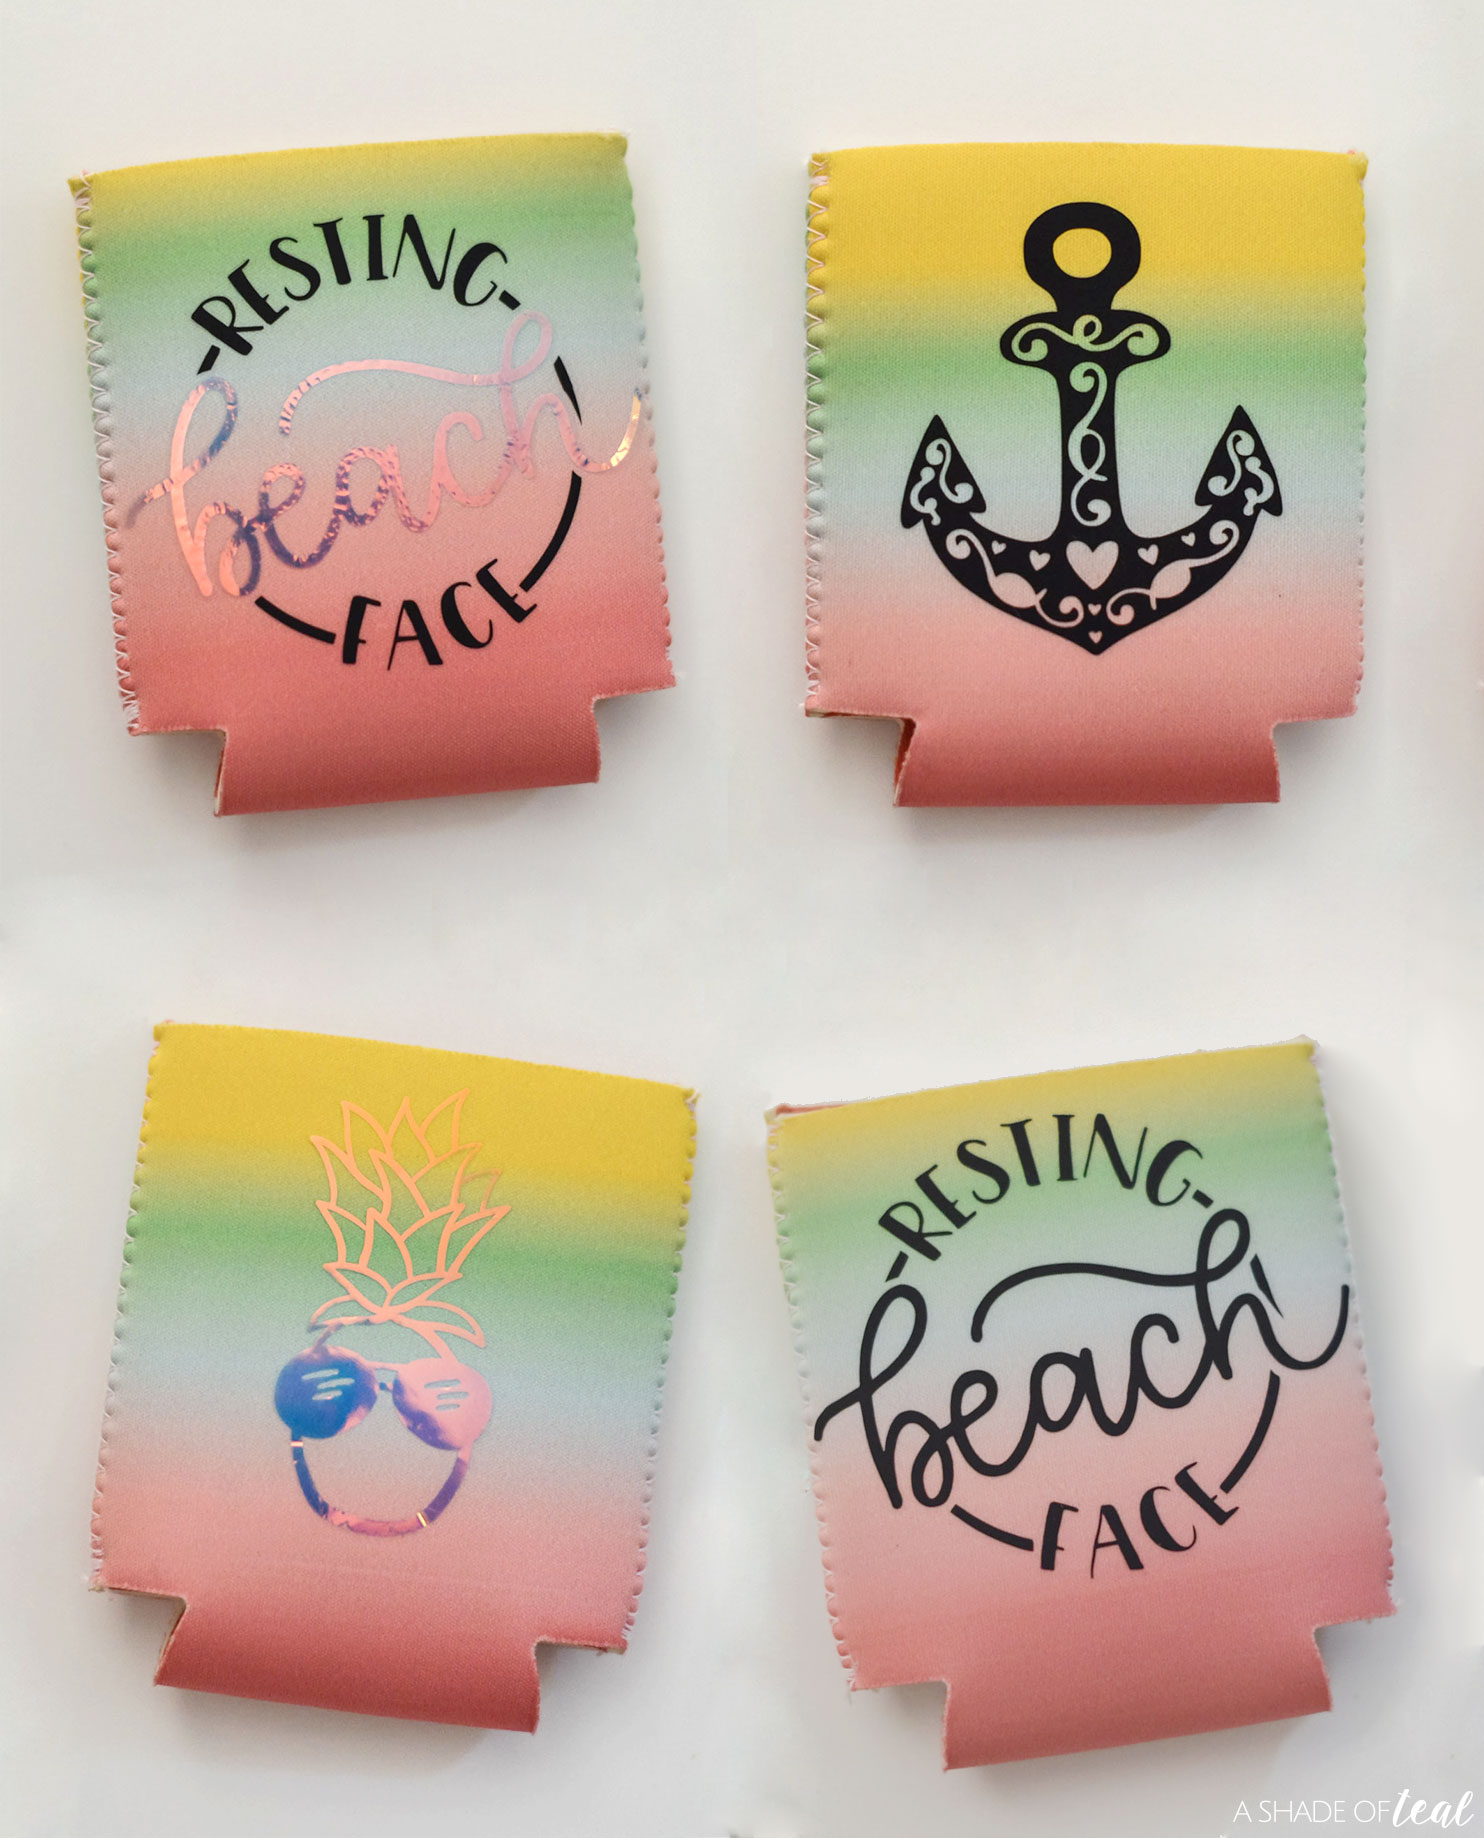 How to Make Cricut Can Koozies with Iron on Vinyl - Hey, Let's Make Stuff